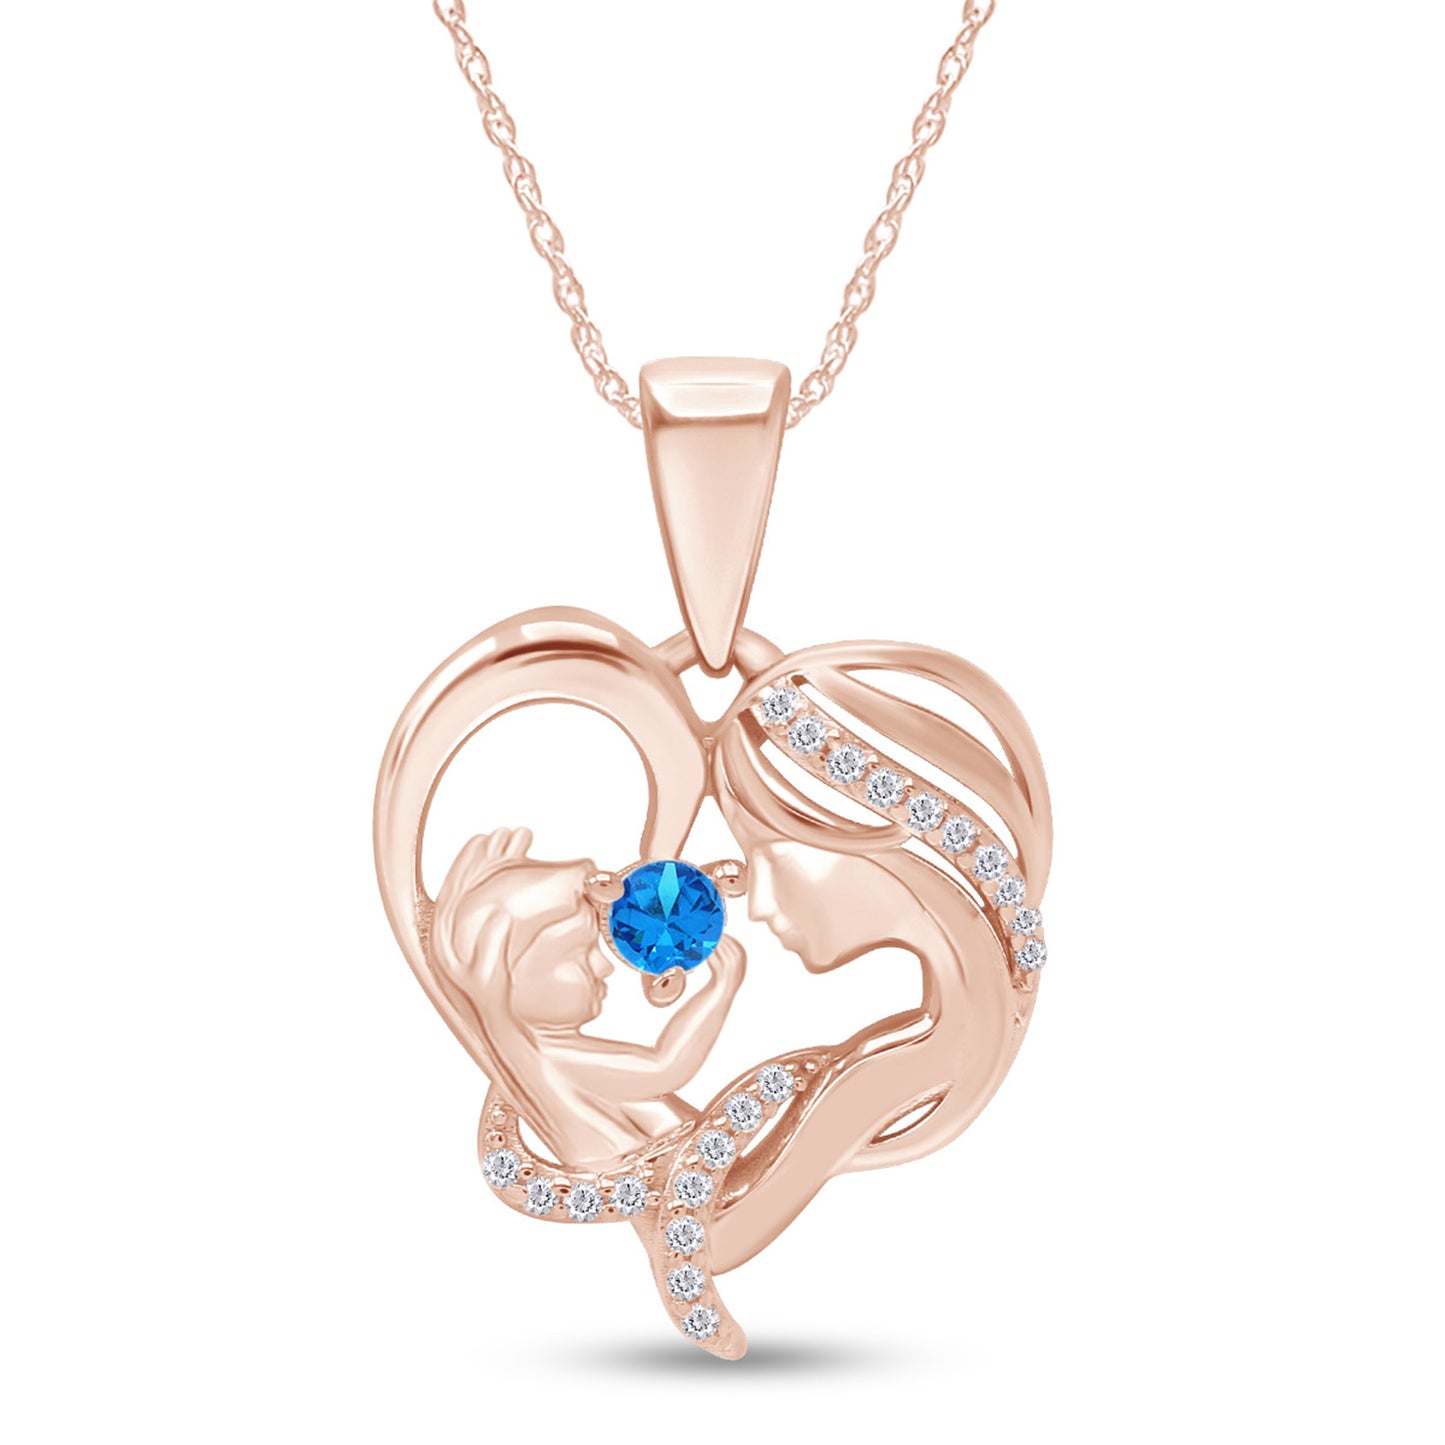 Round Cut Simulated Birthstone & White Cubic Zirconia Mom with Child Heart Pendant Necklace in 14K Rose Gold Over Sterling Silver